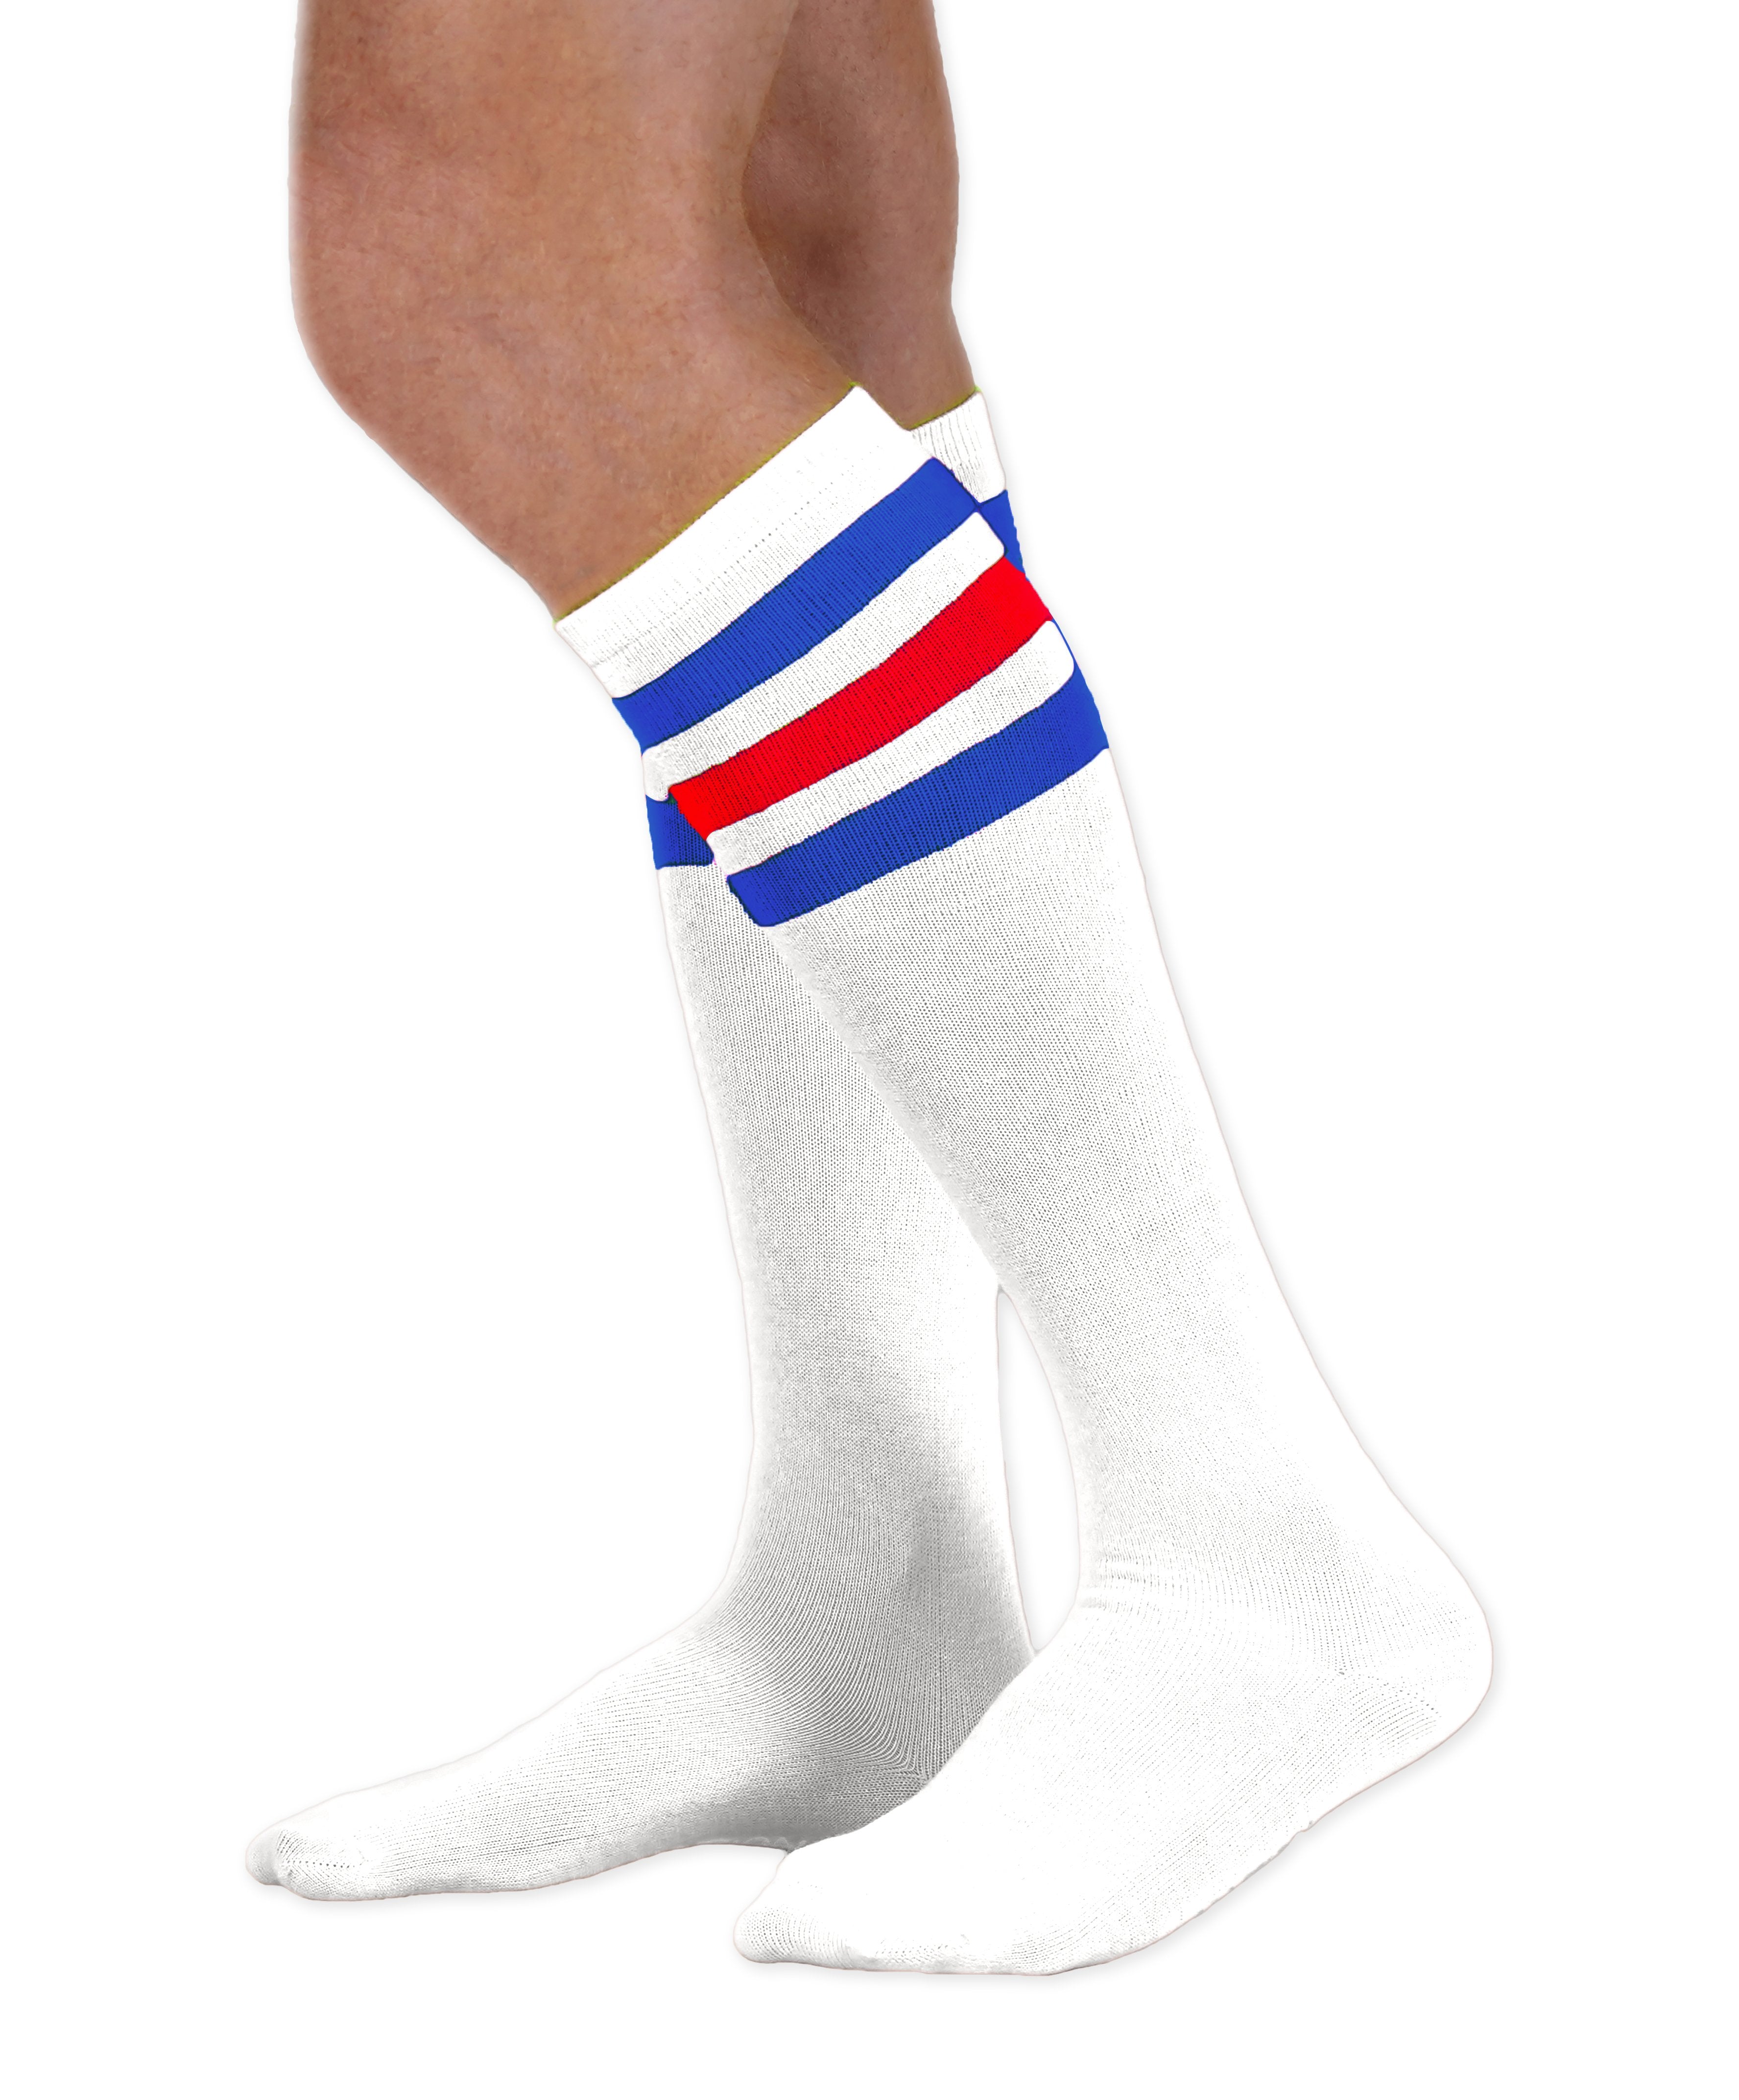 Unisex adult size white knee high tube sock with three royal blue and red stripes